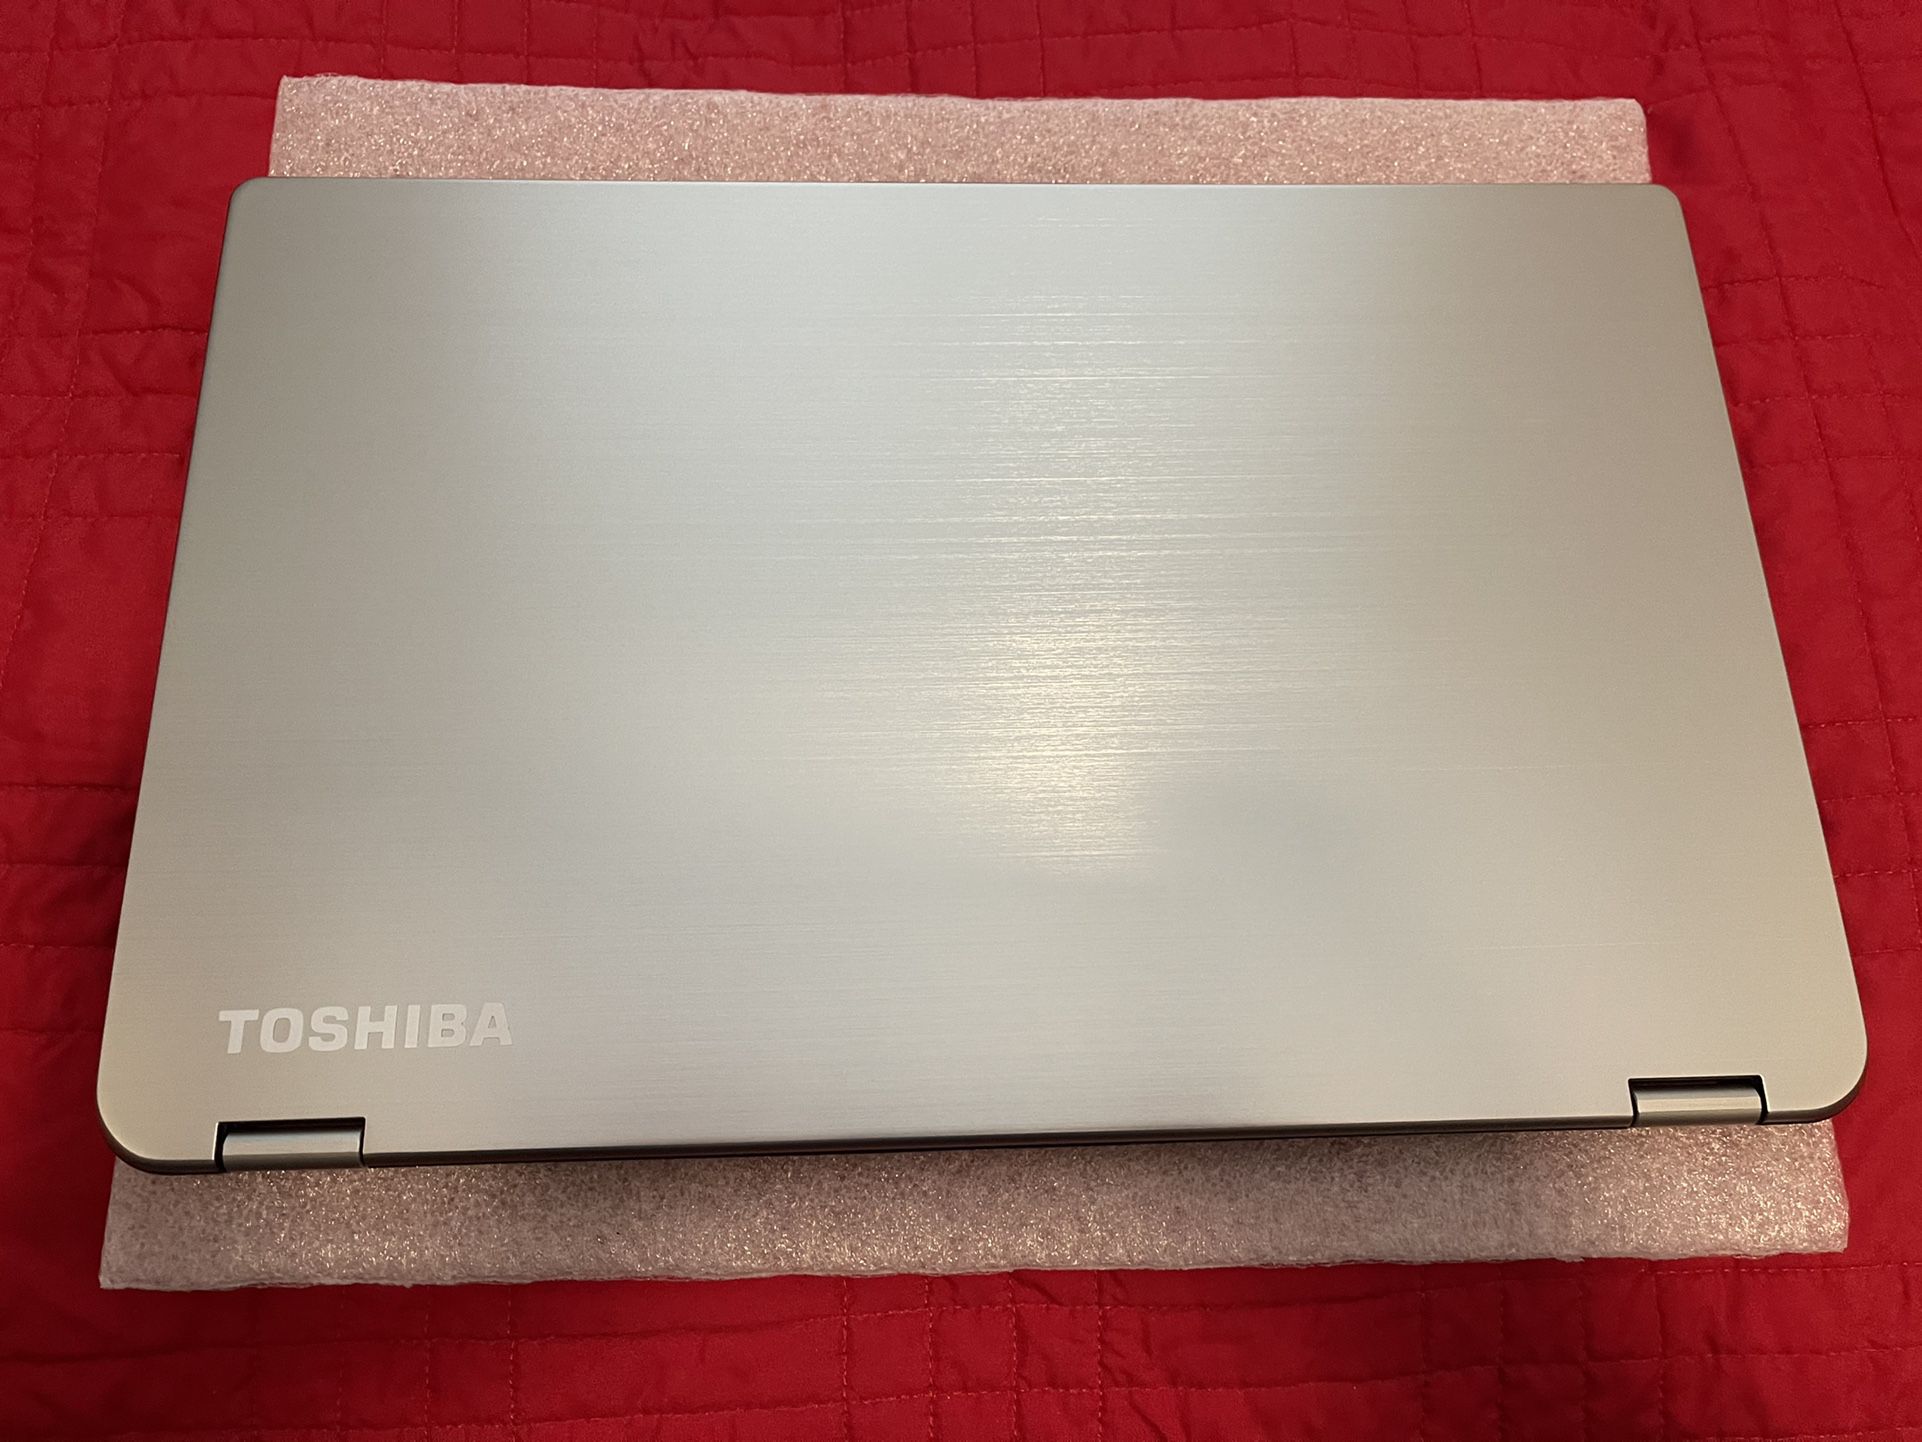 Toshiba Laptop For Part 